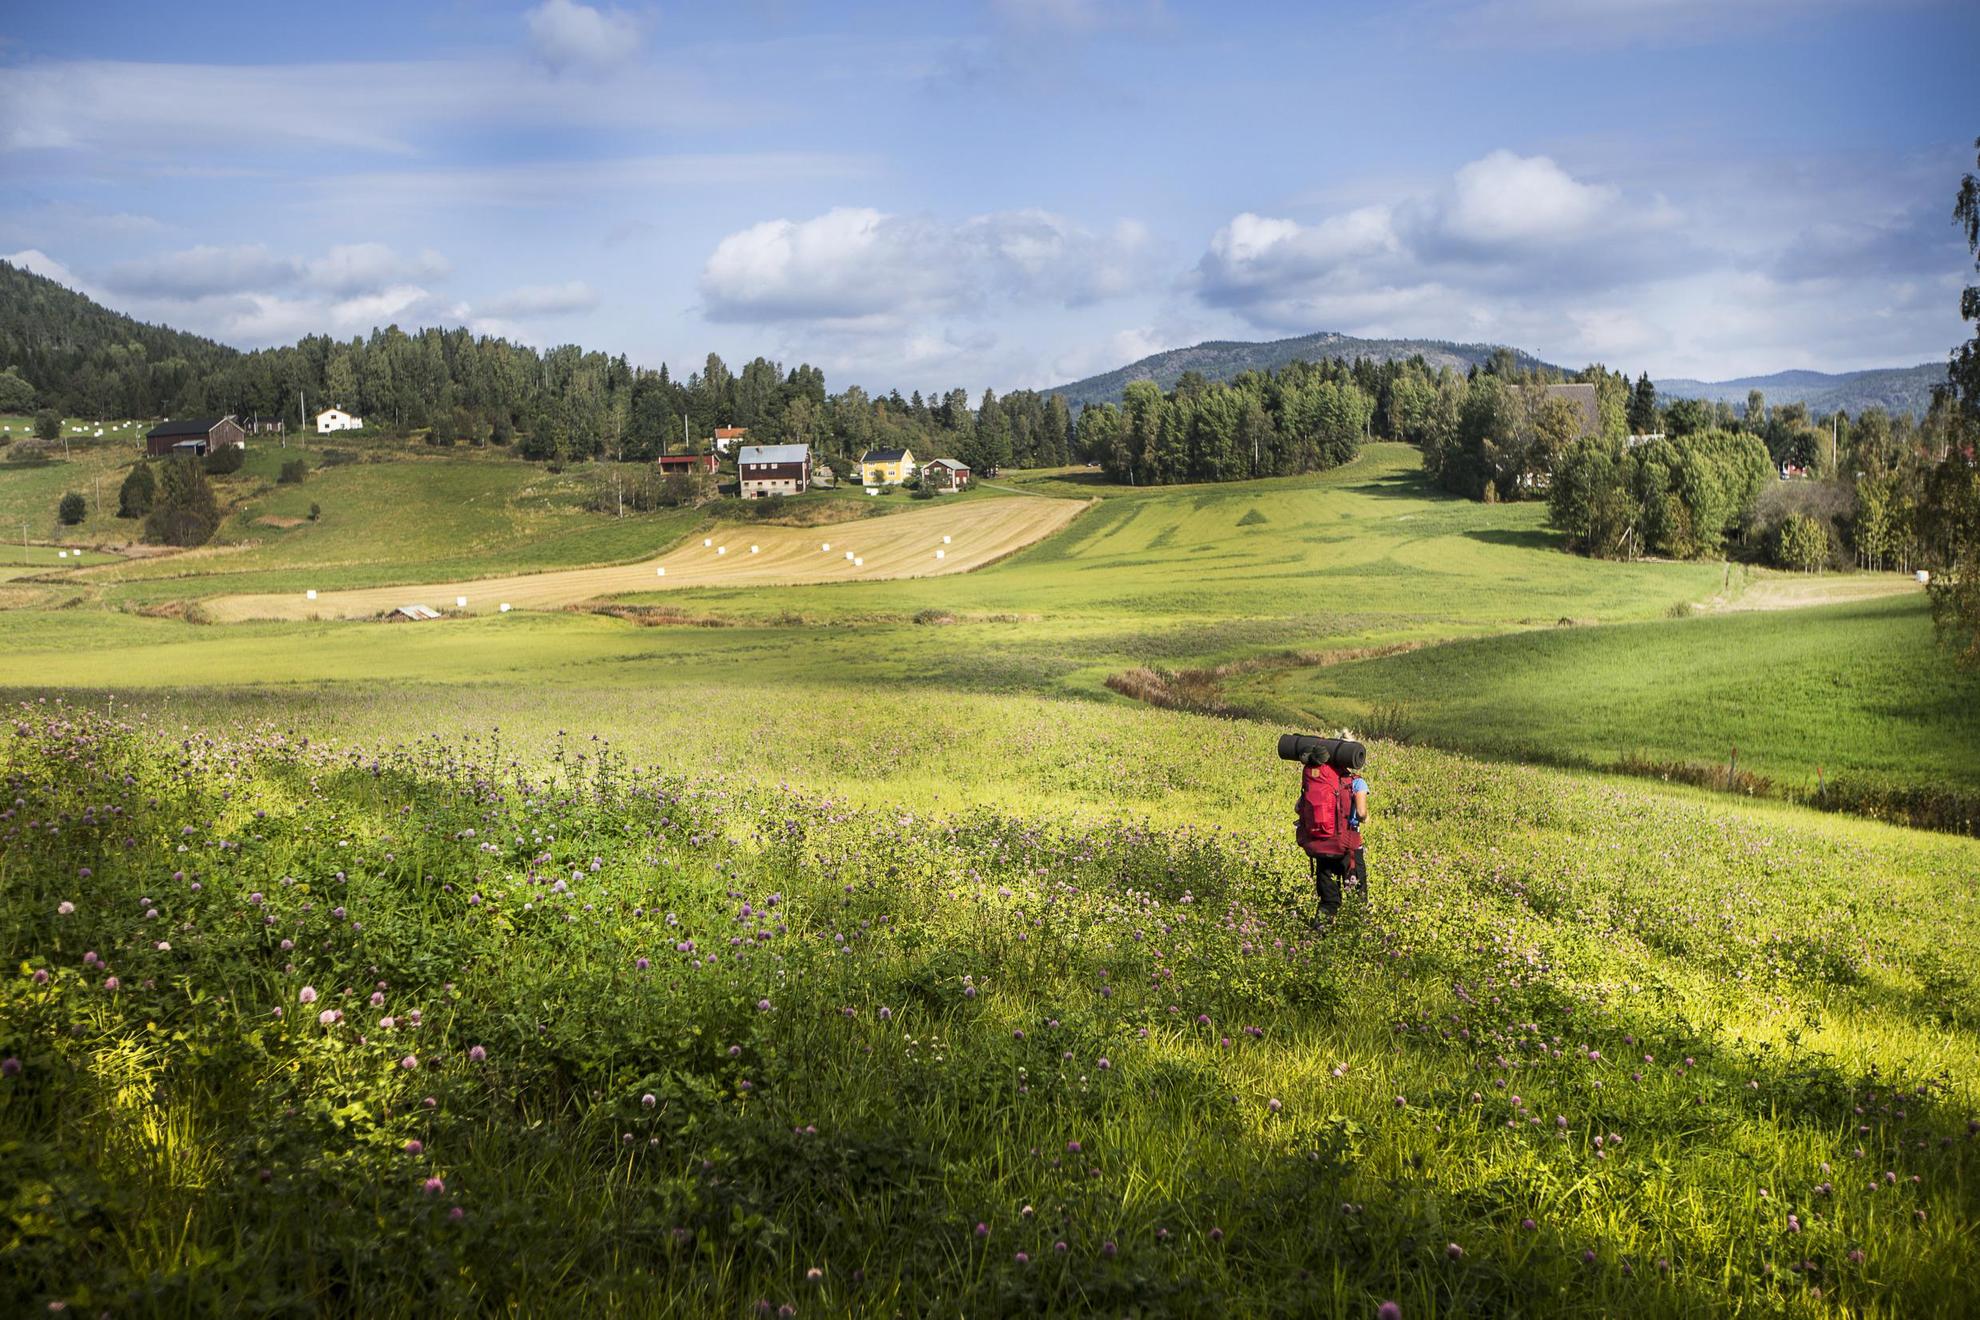 A person with a backpack is hiking through a meadow during summer.